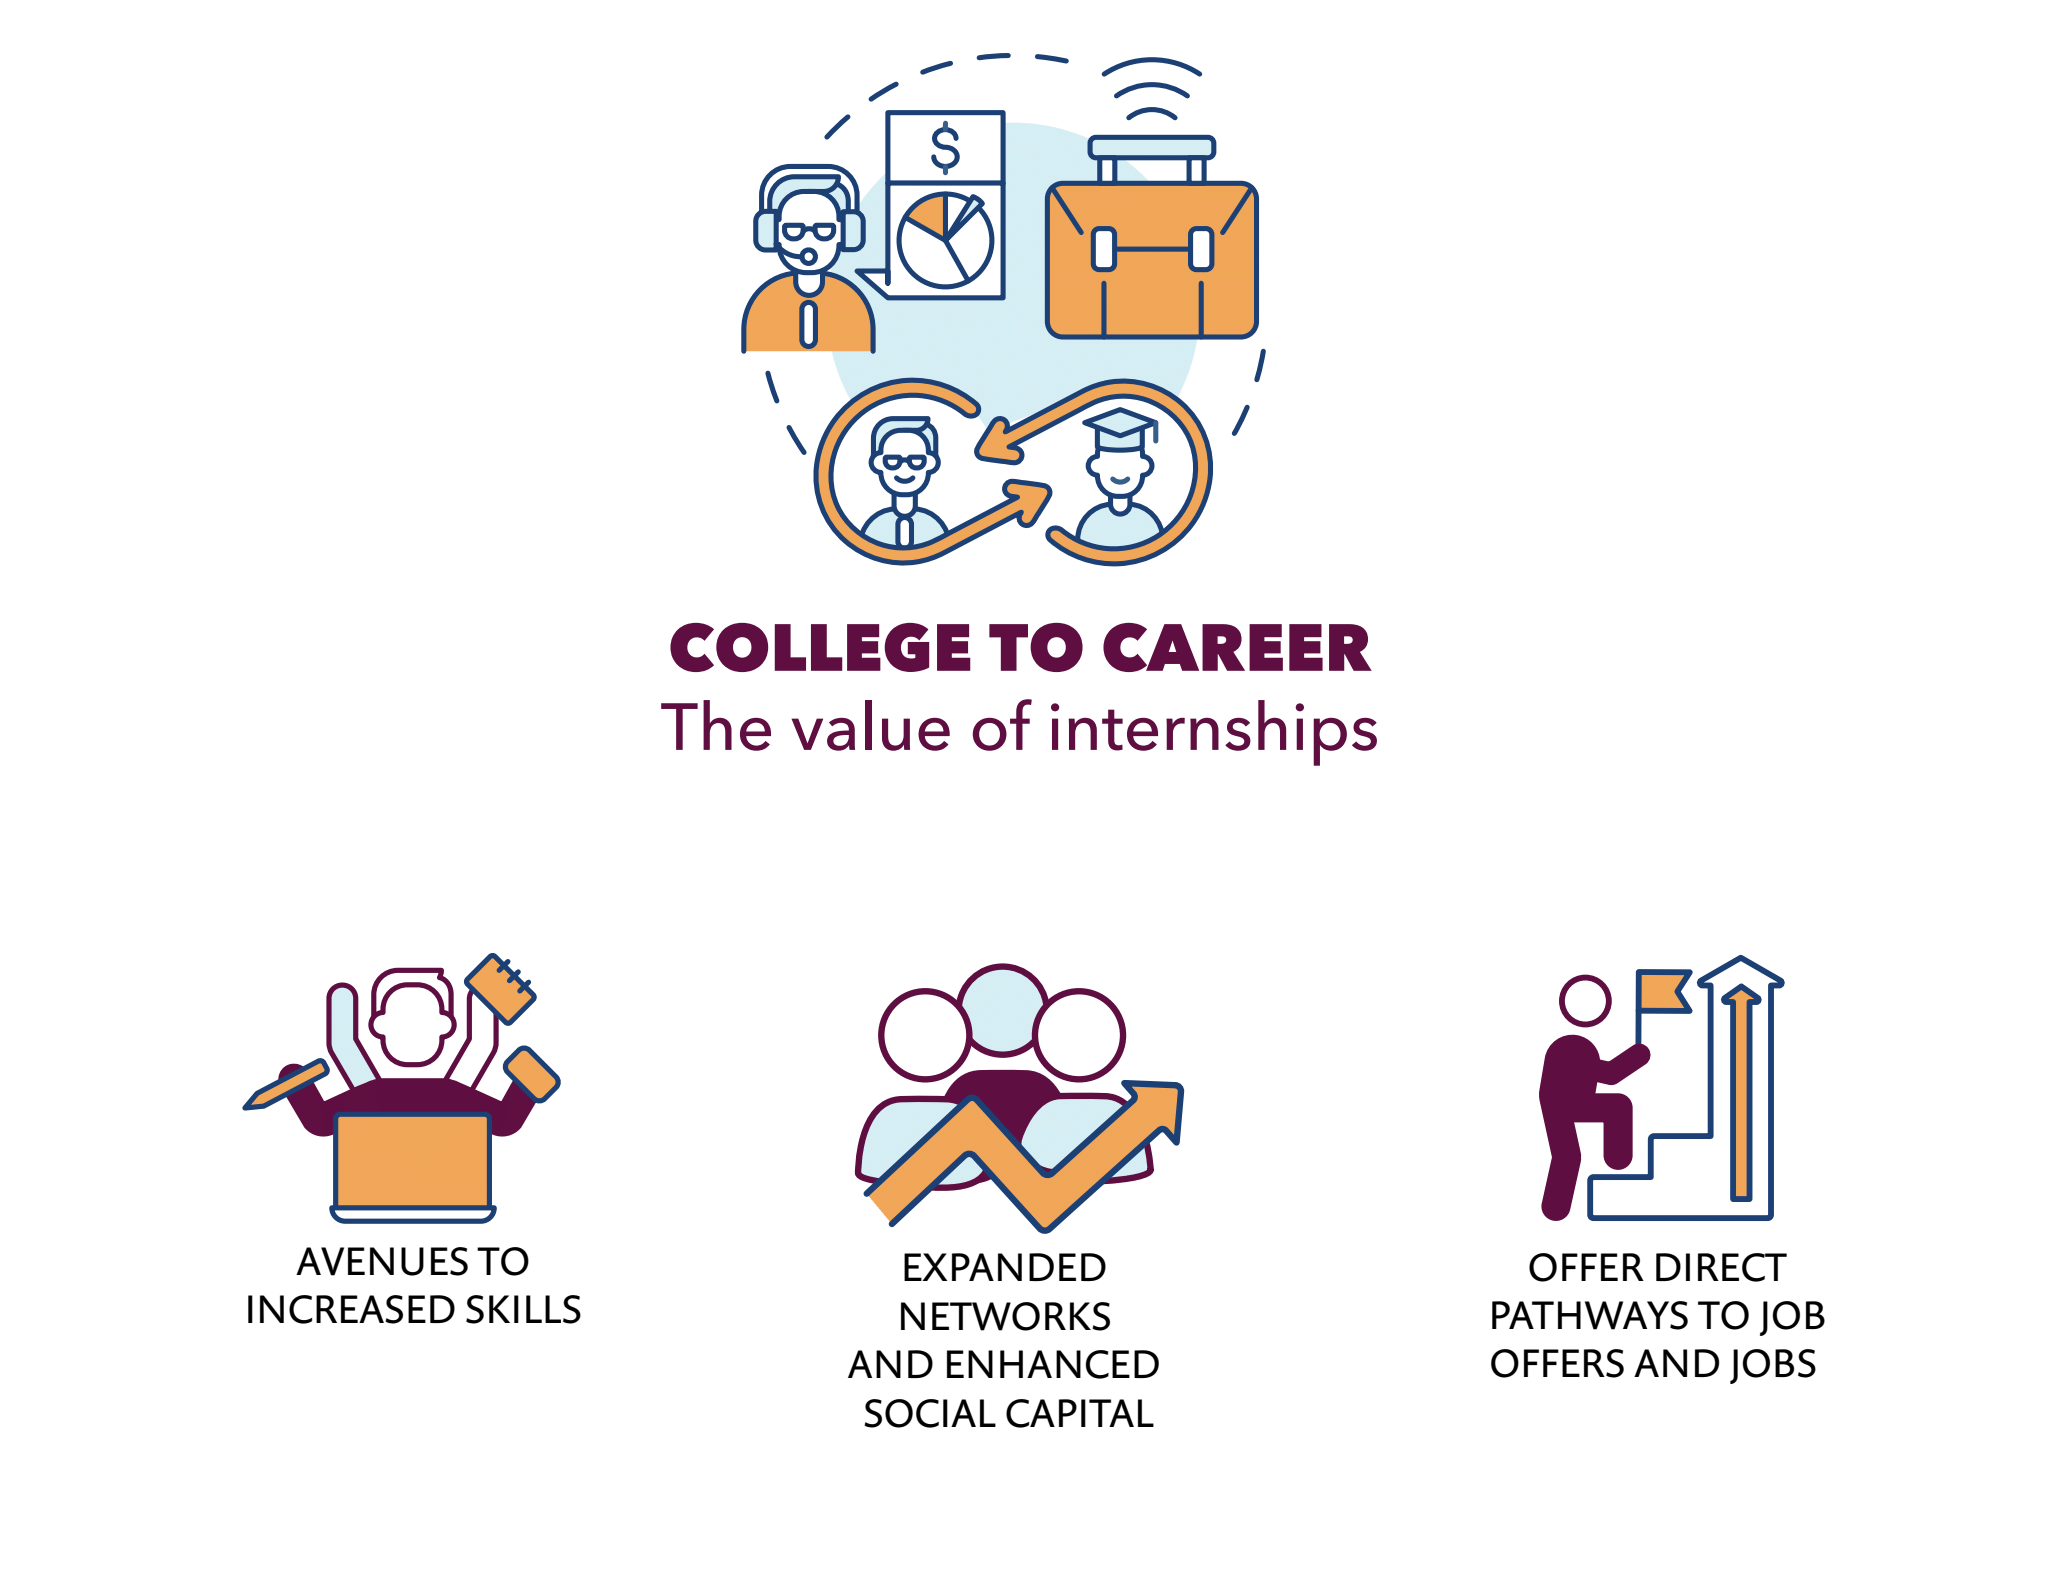 College to career - the value of internships (NACE)